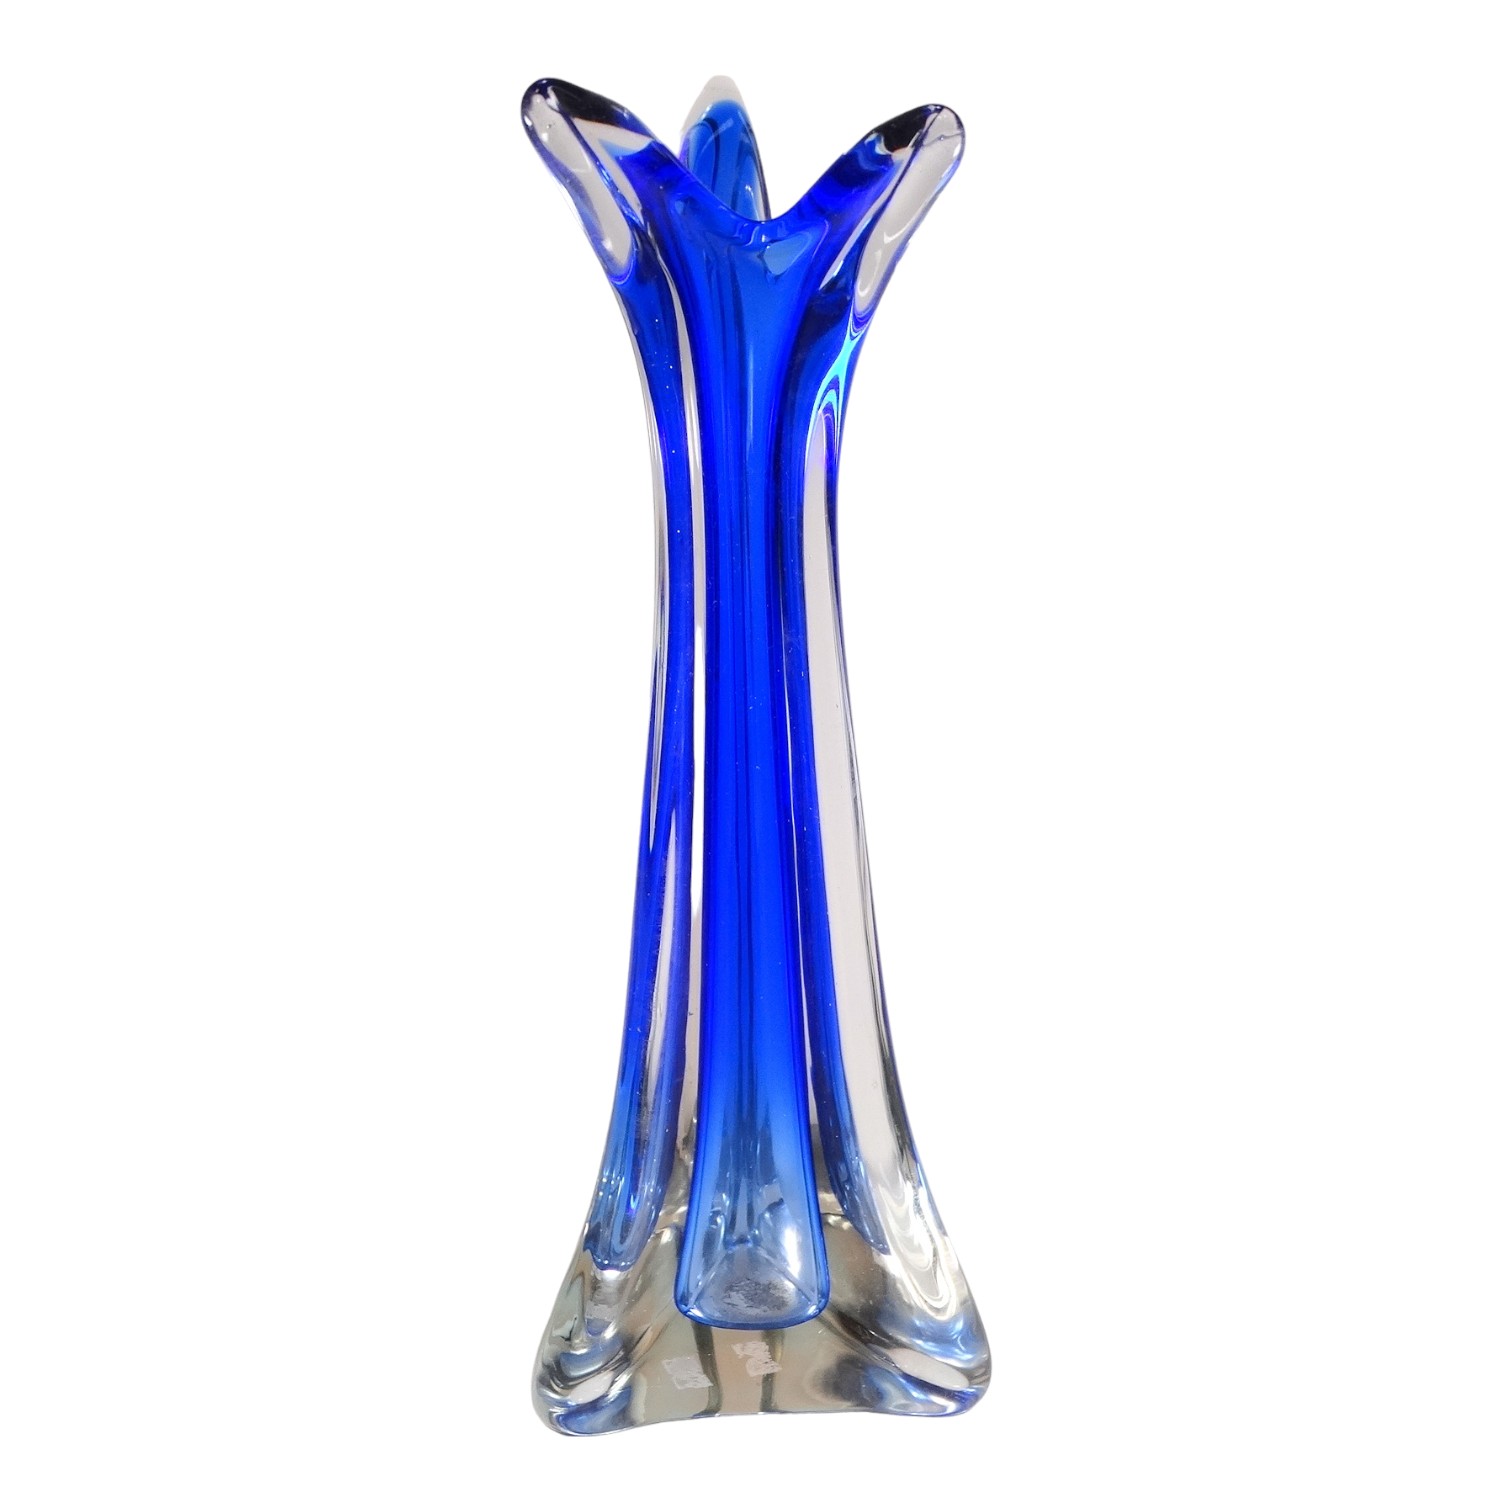 A Summerso stem vase - deep blue, of triangular tapering form, height 40cm.